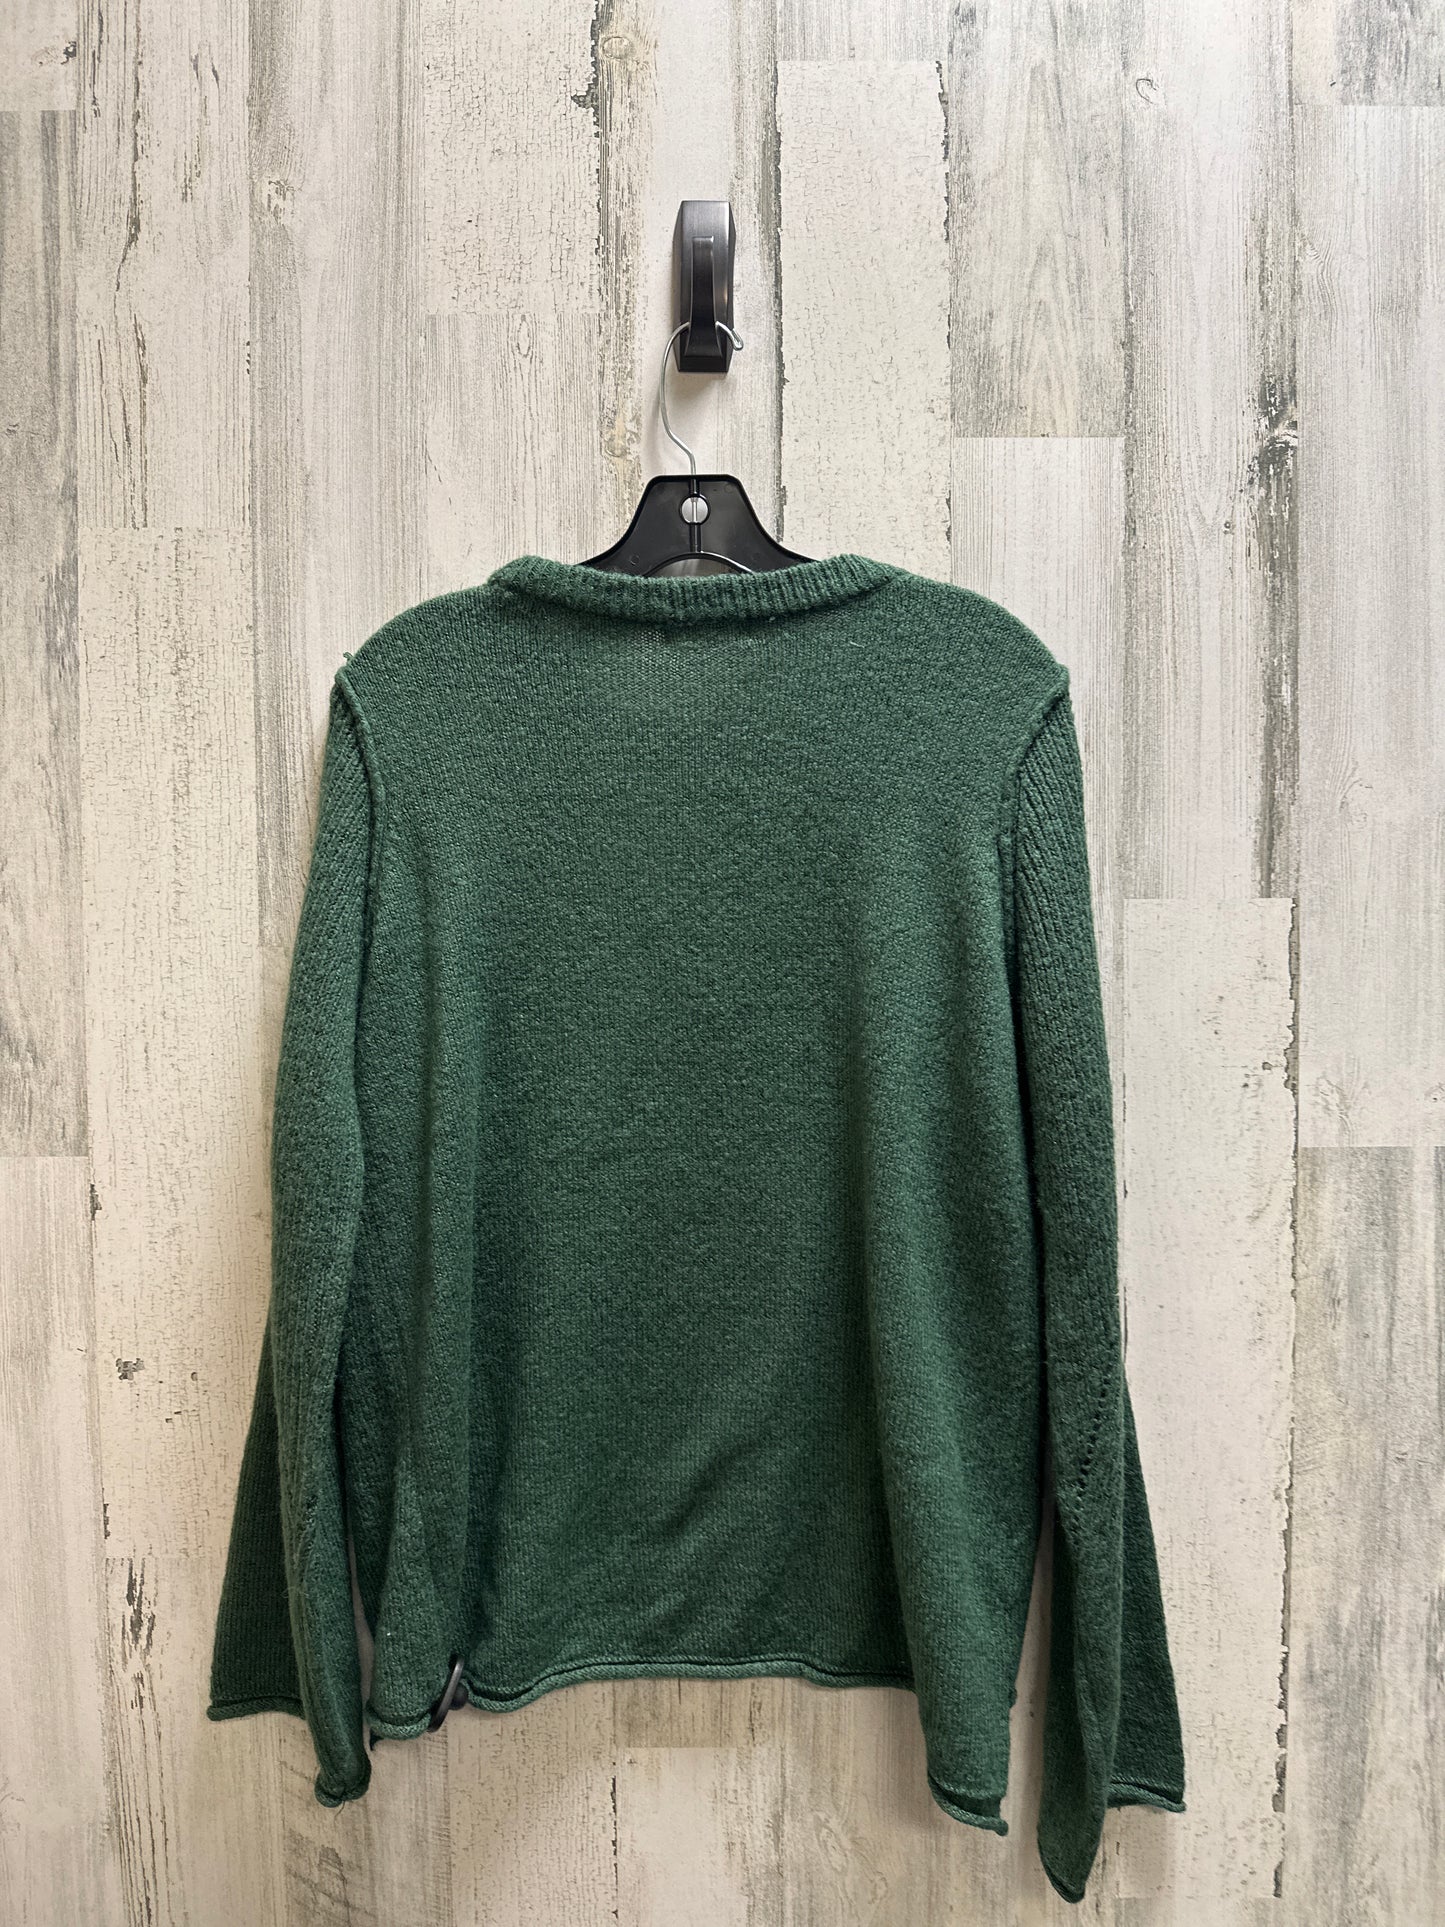 Sweater By Altard State  Size: M